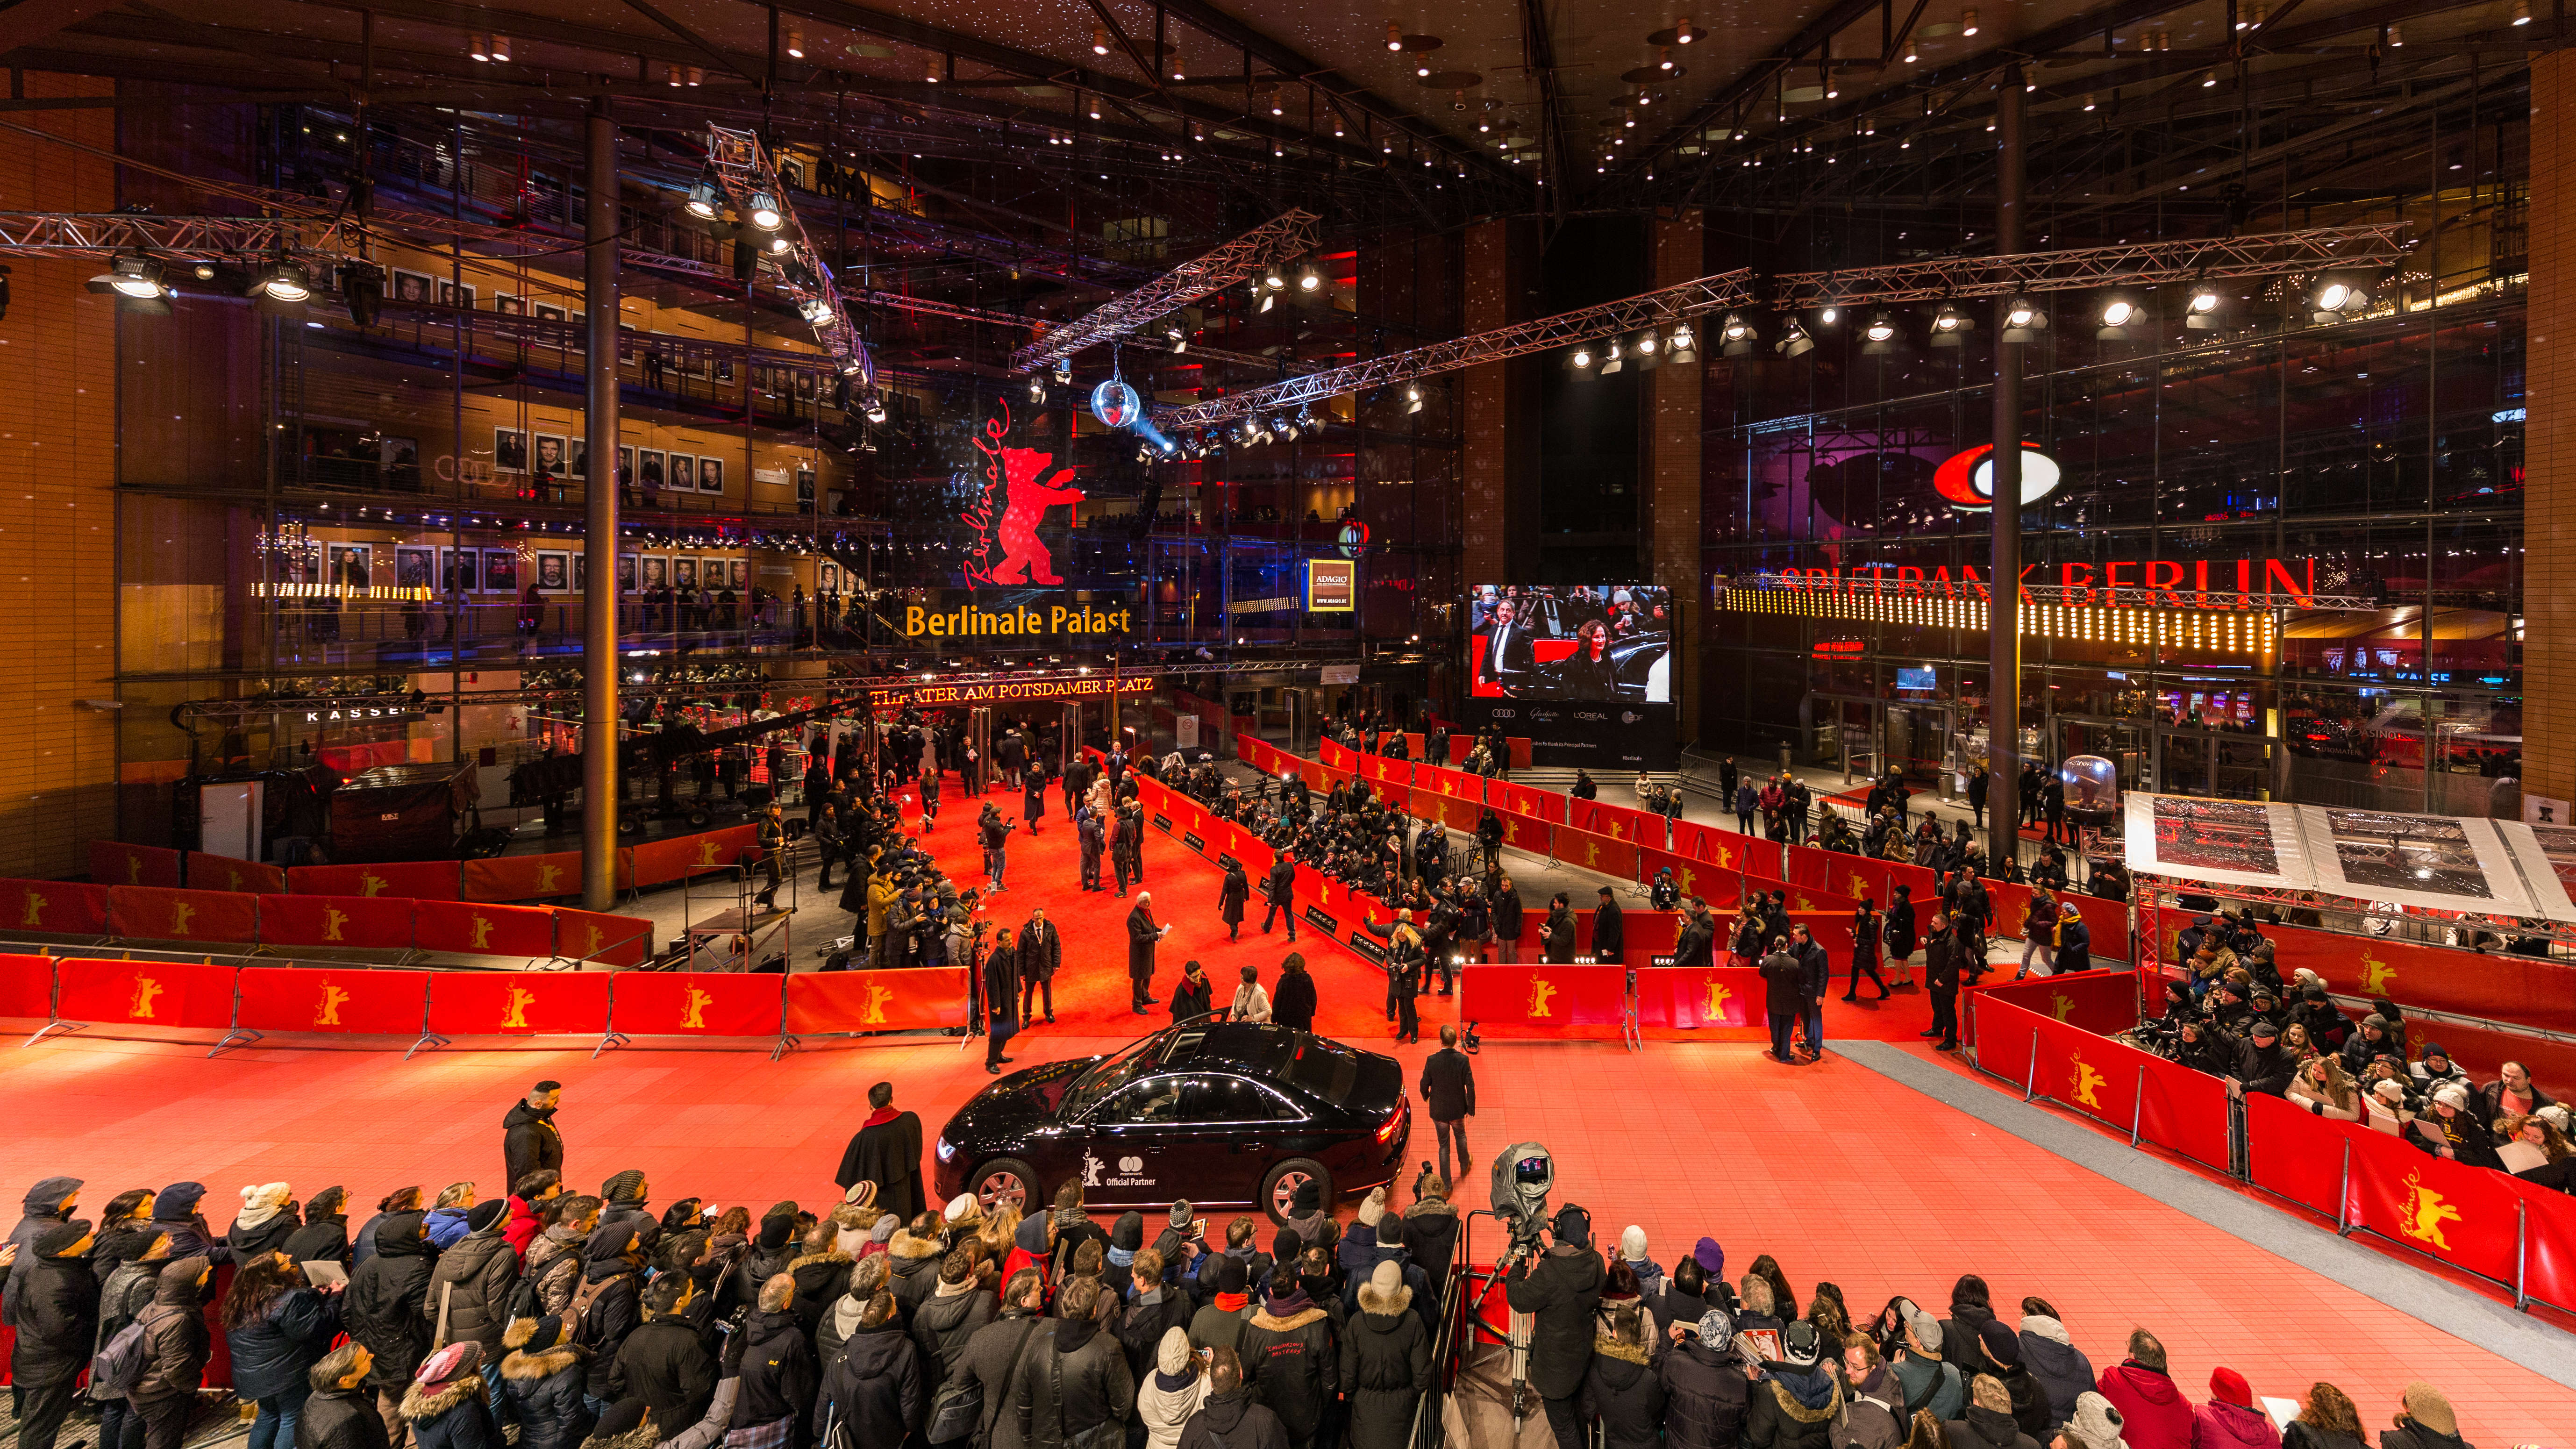 The red carpet during at the Berlinale Palast the the berlinale premier of Viceroy's House